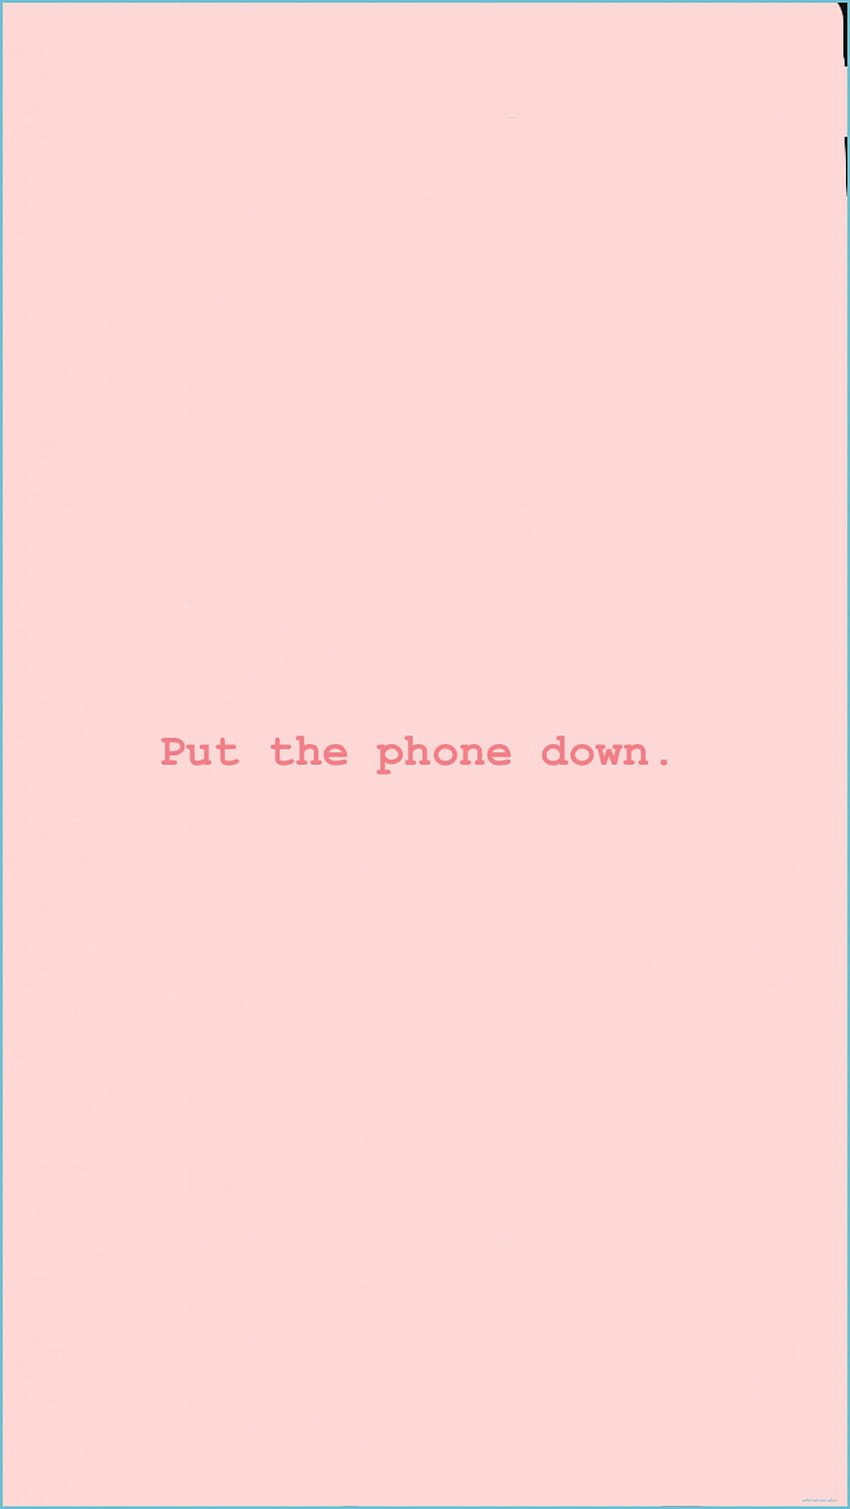 Odłóż Telefon Iphone Quotes Funny, Quotes, aesthetic teen wallpaper ponsel HD